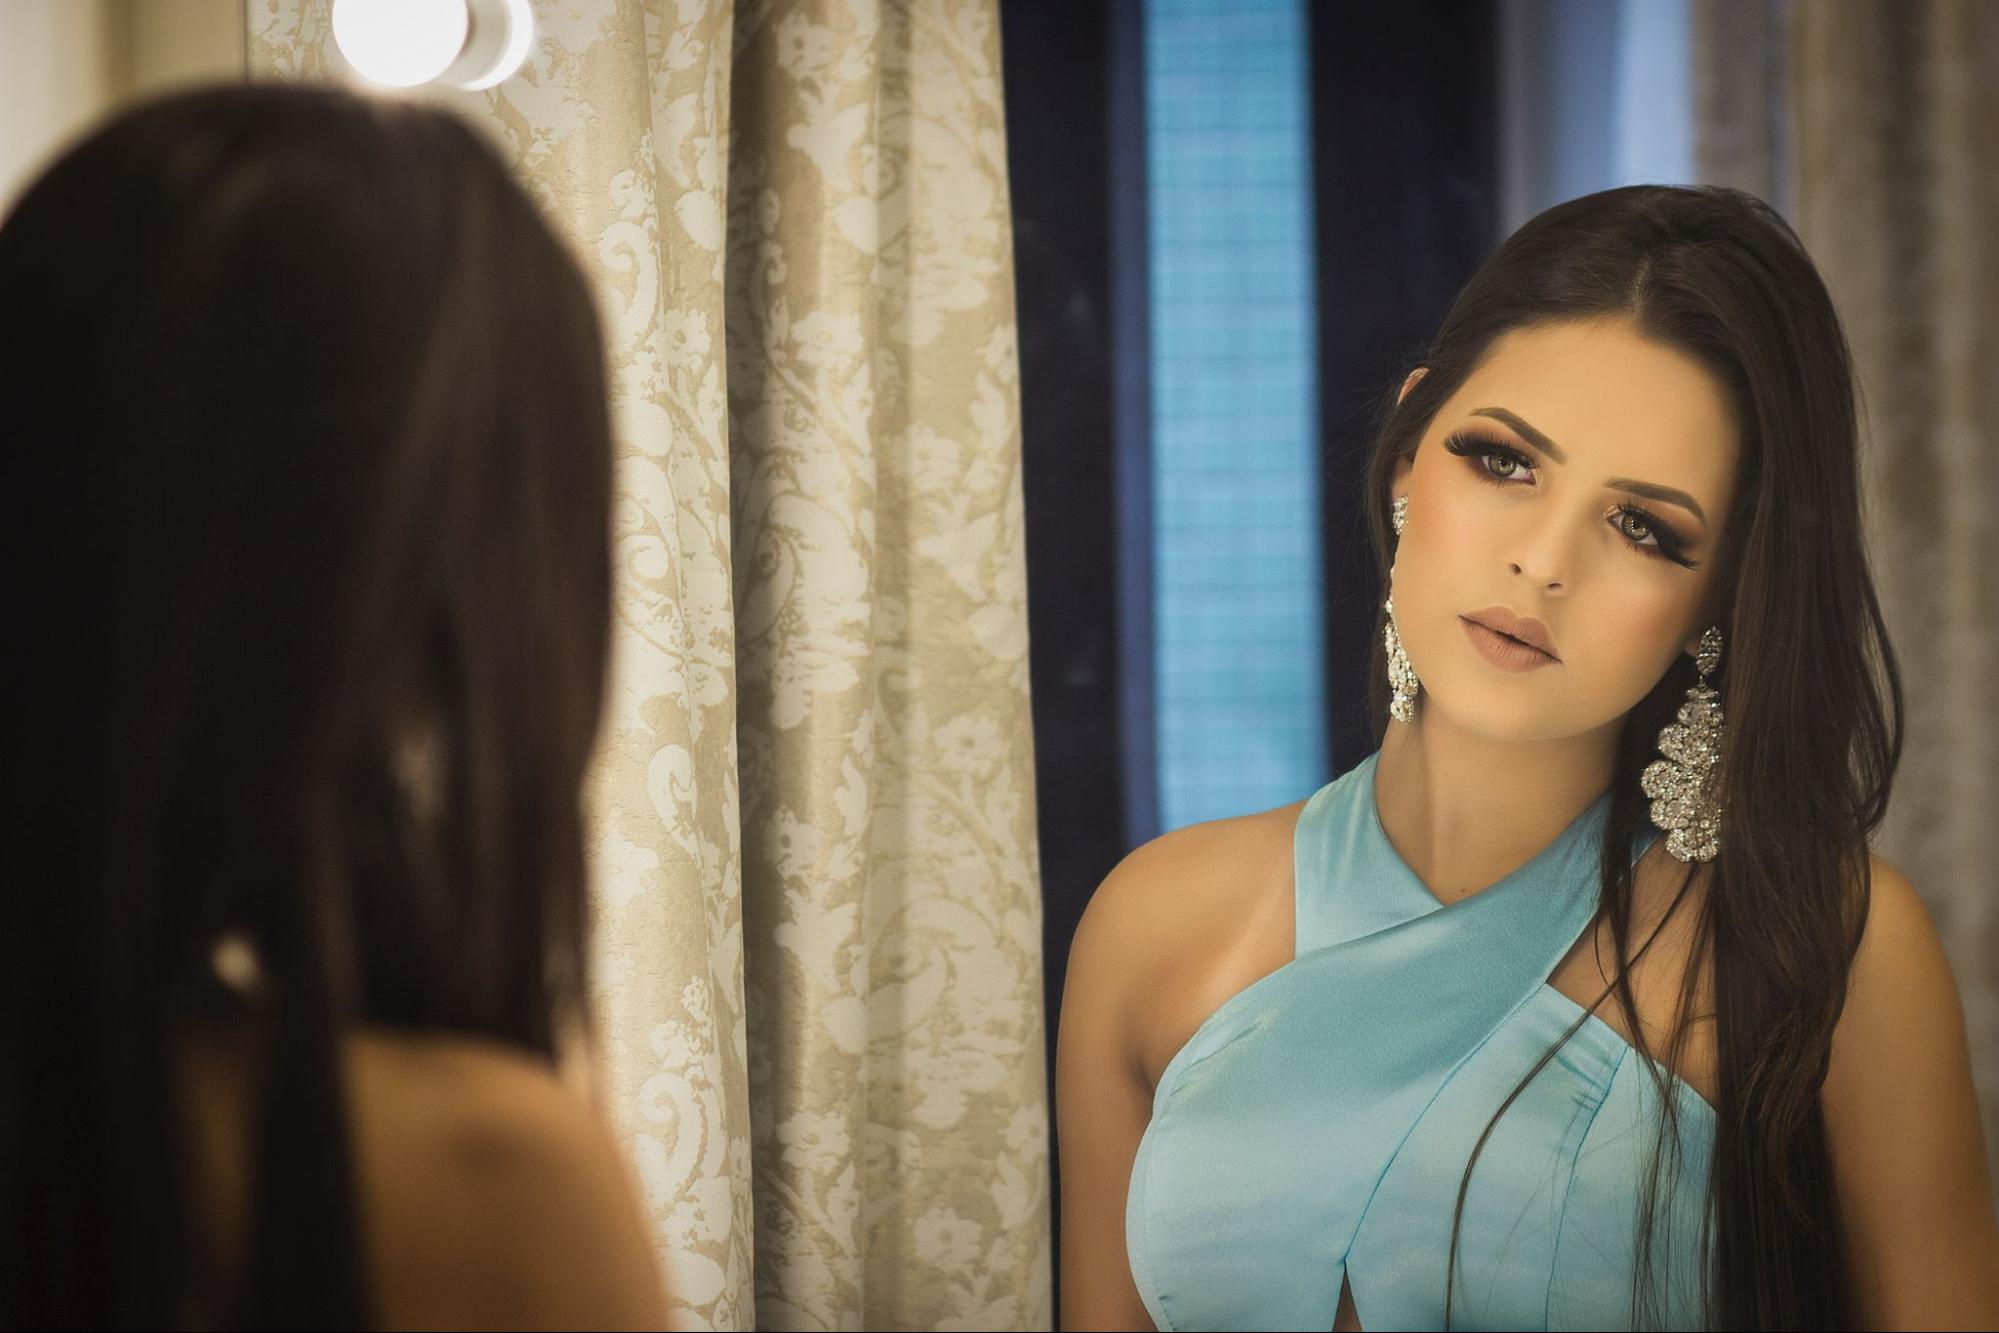 a woman in a blue formal dress and wearing dramatic diamond earrings looks in the mirror.